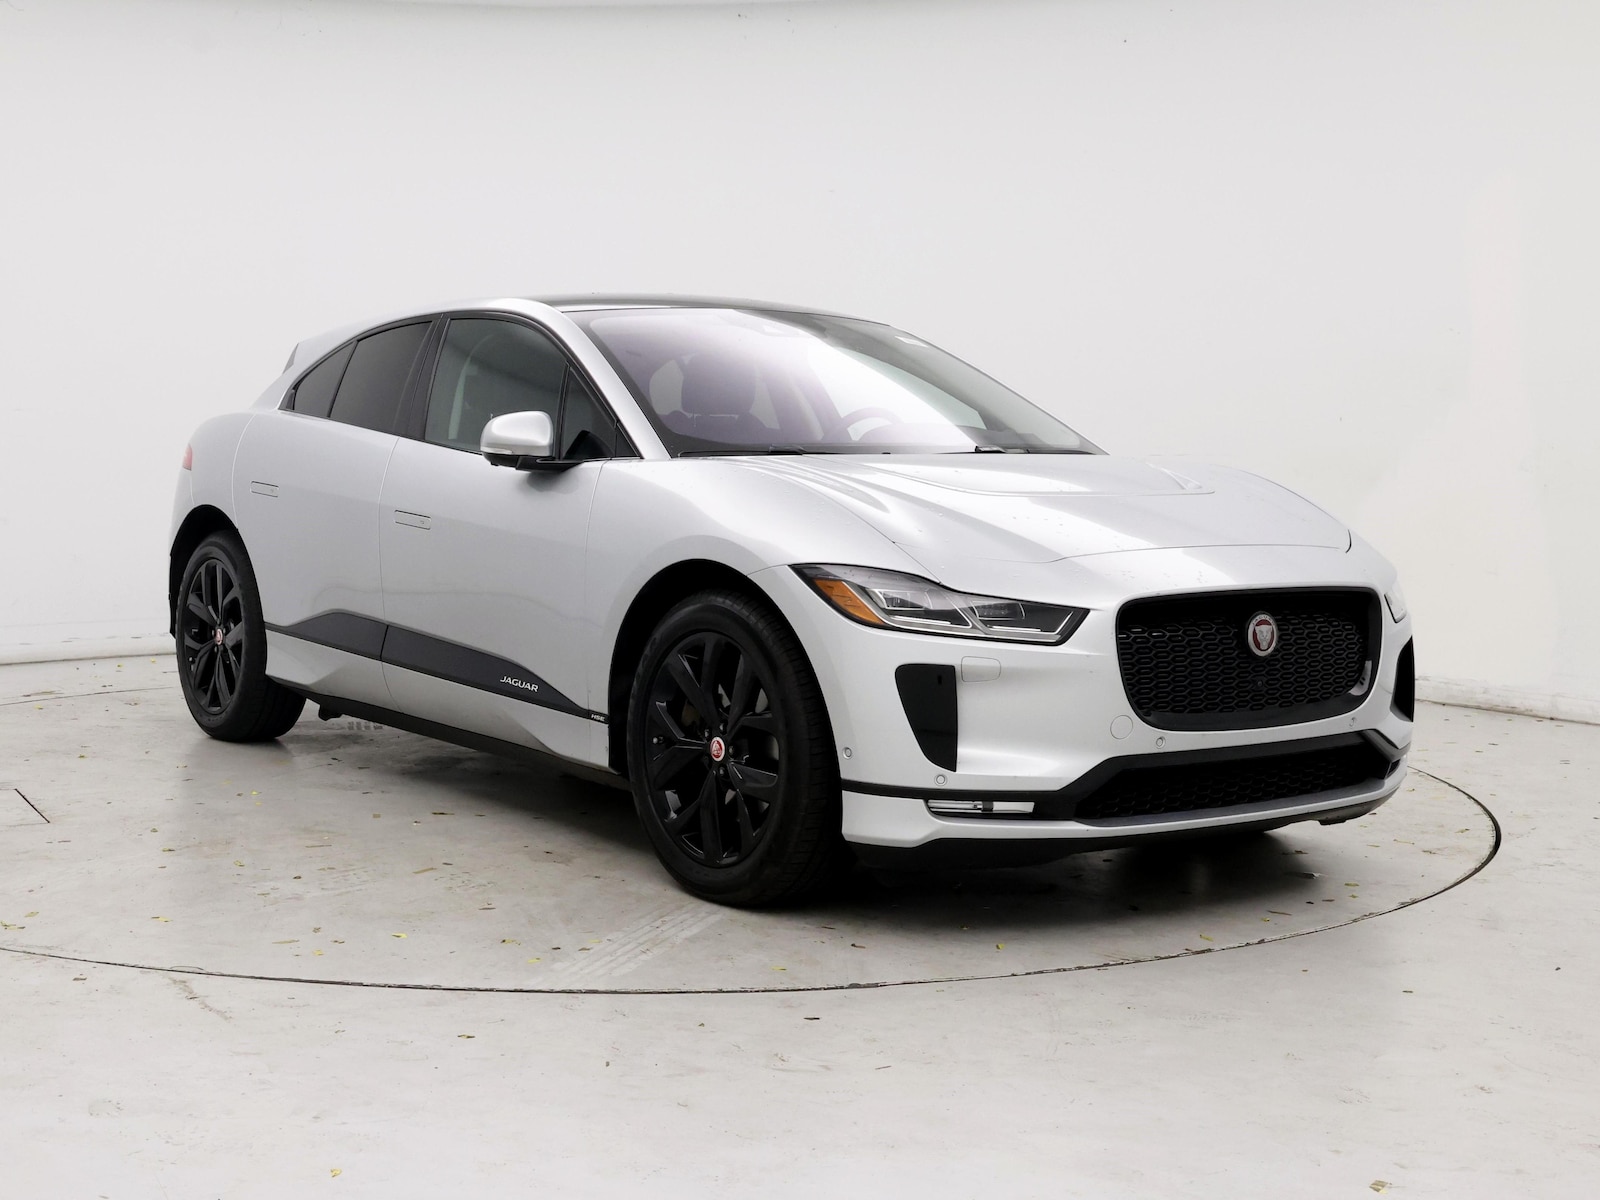 Used 2019 Jaguar I-PACE First Edition with VIN SADHD2S16K1F74504 for sale in Kenosha, WI